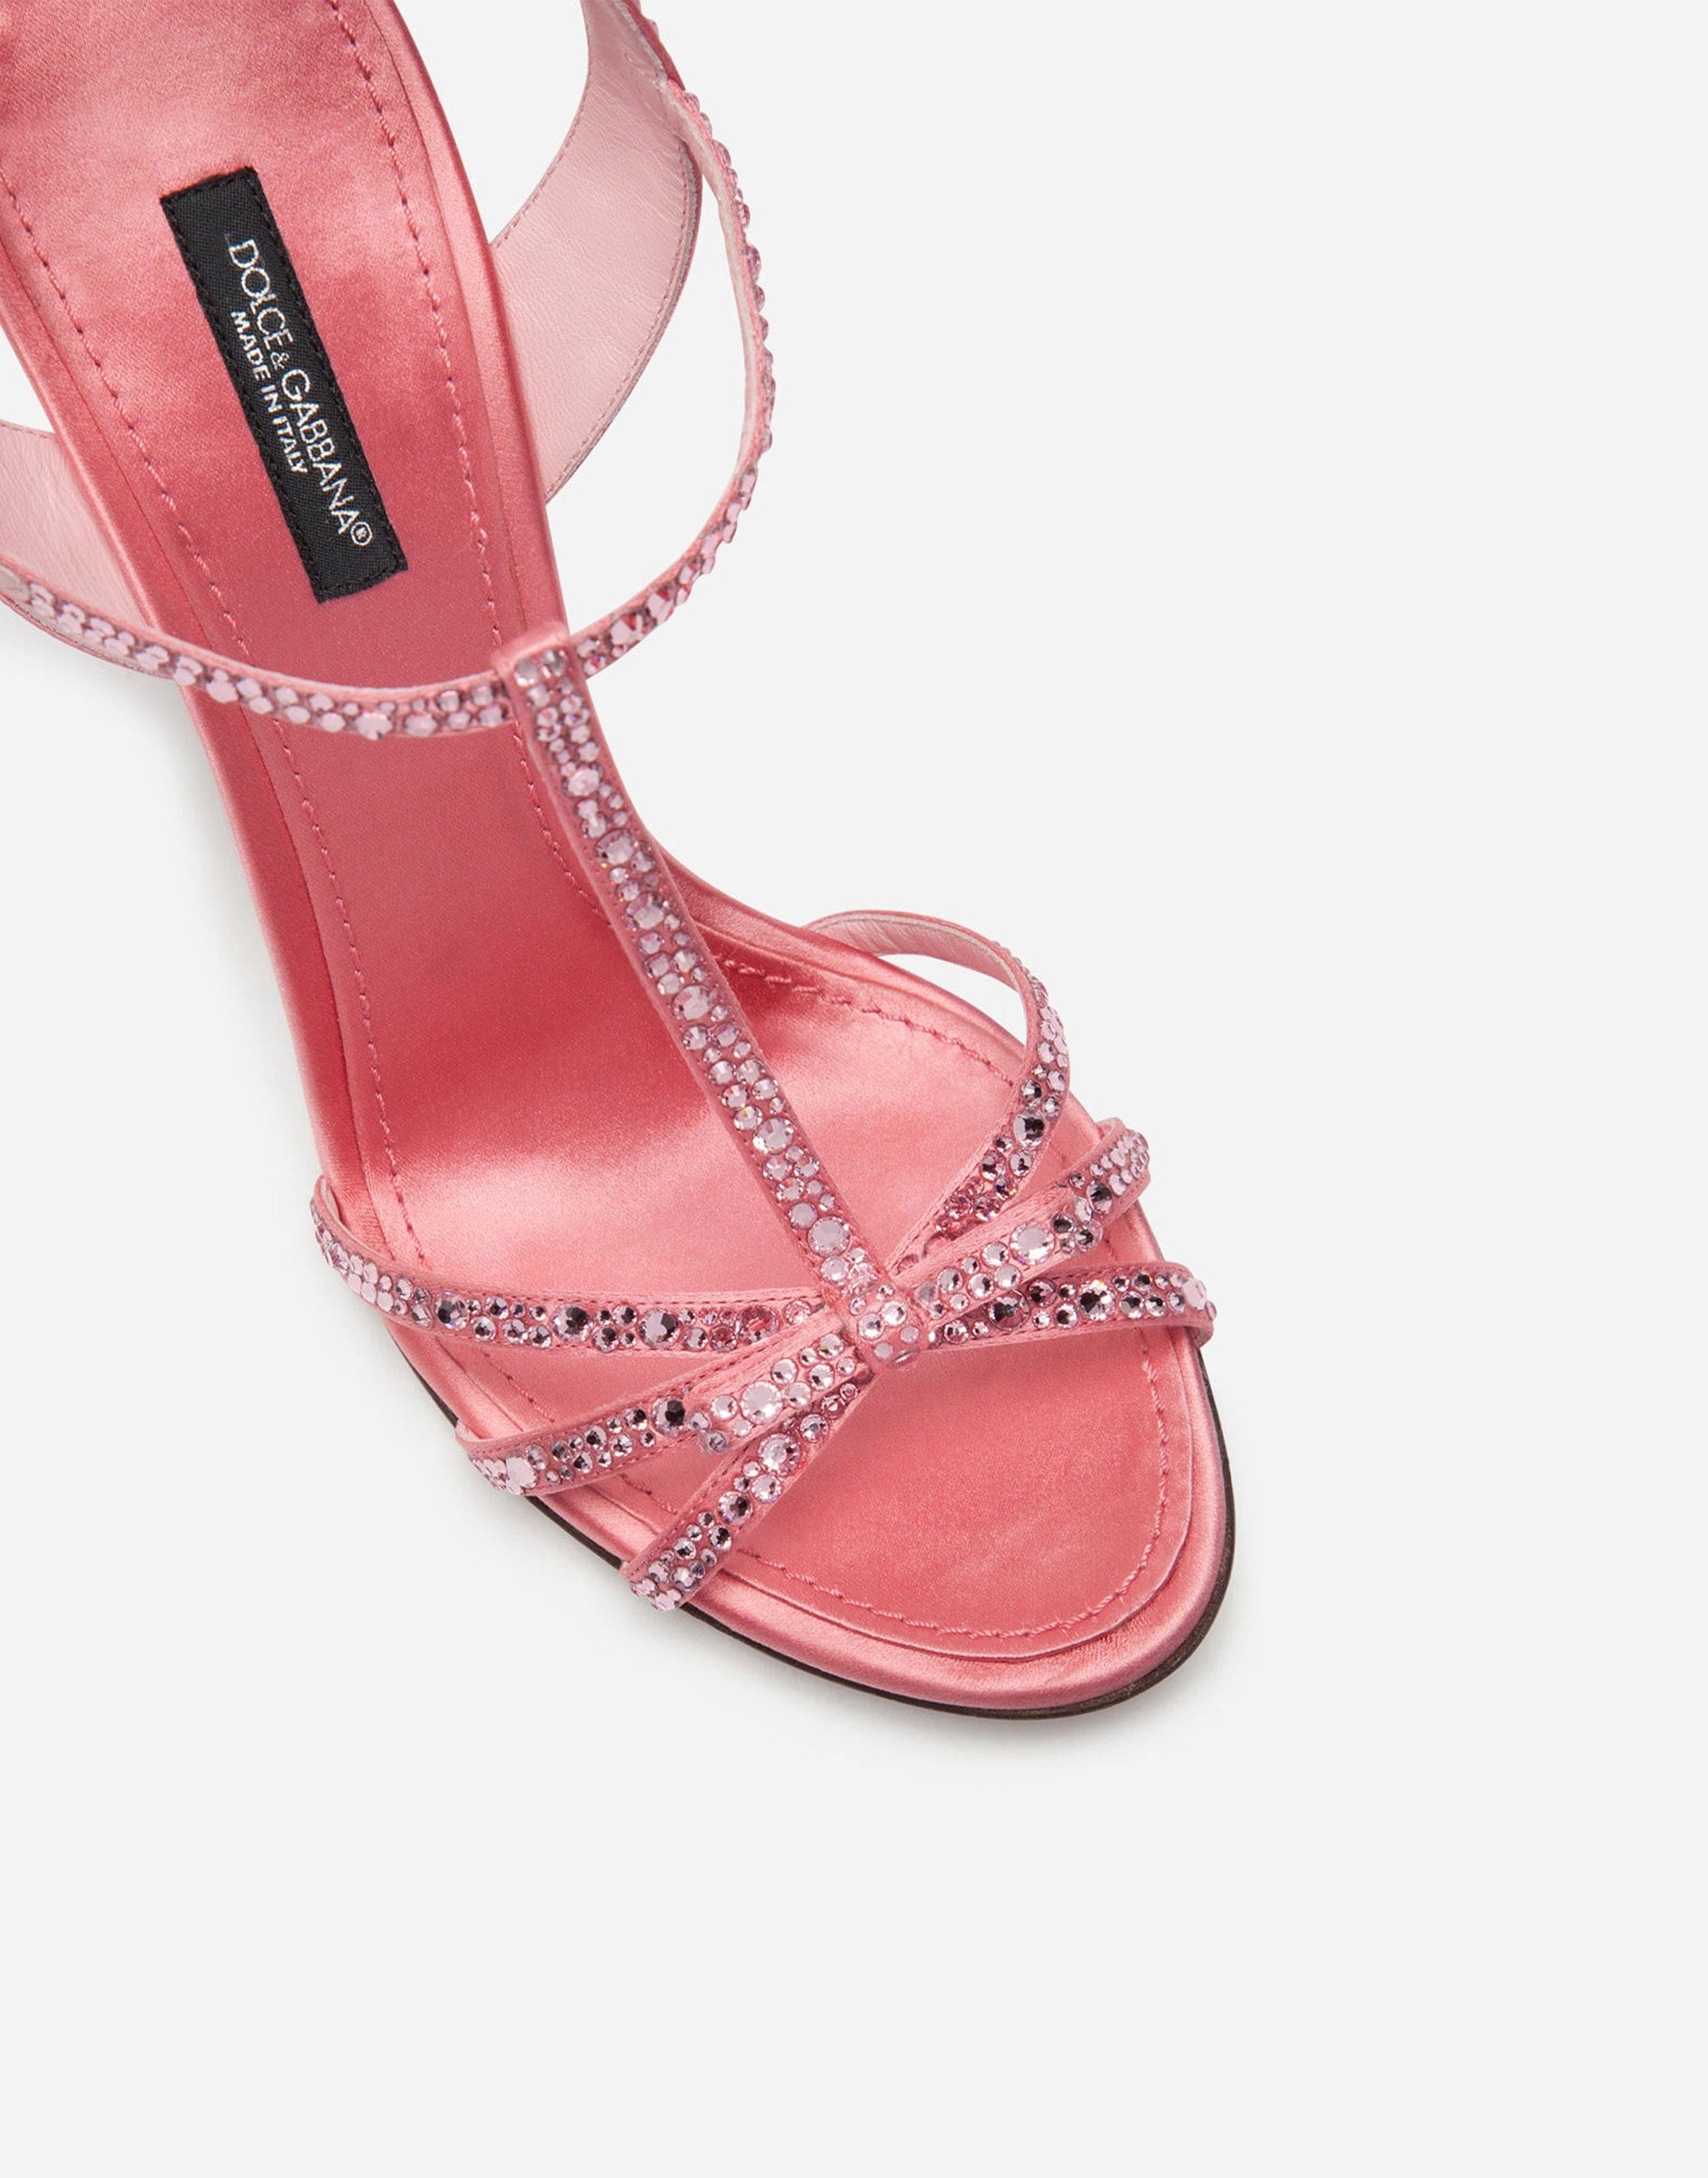 Dolce & Gabbana Satin Sandals With Crystals